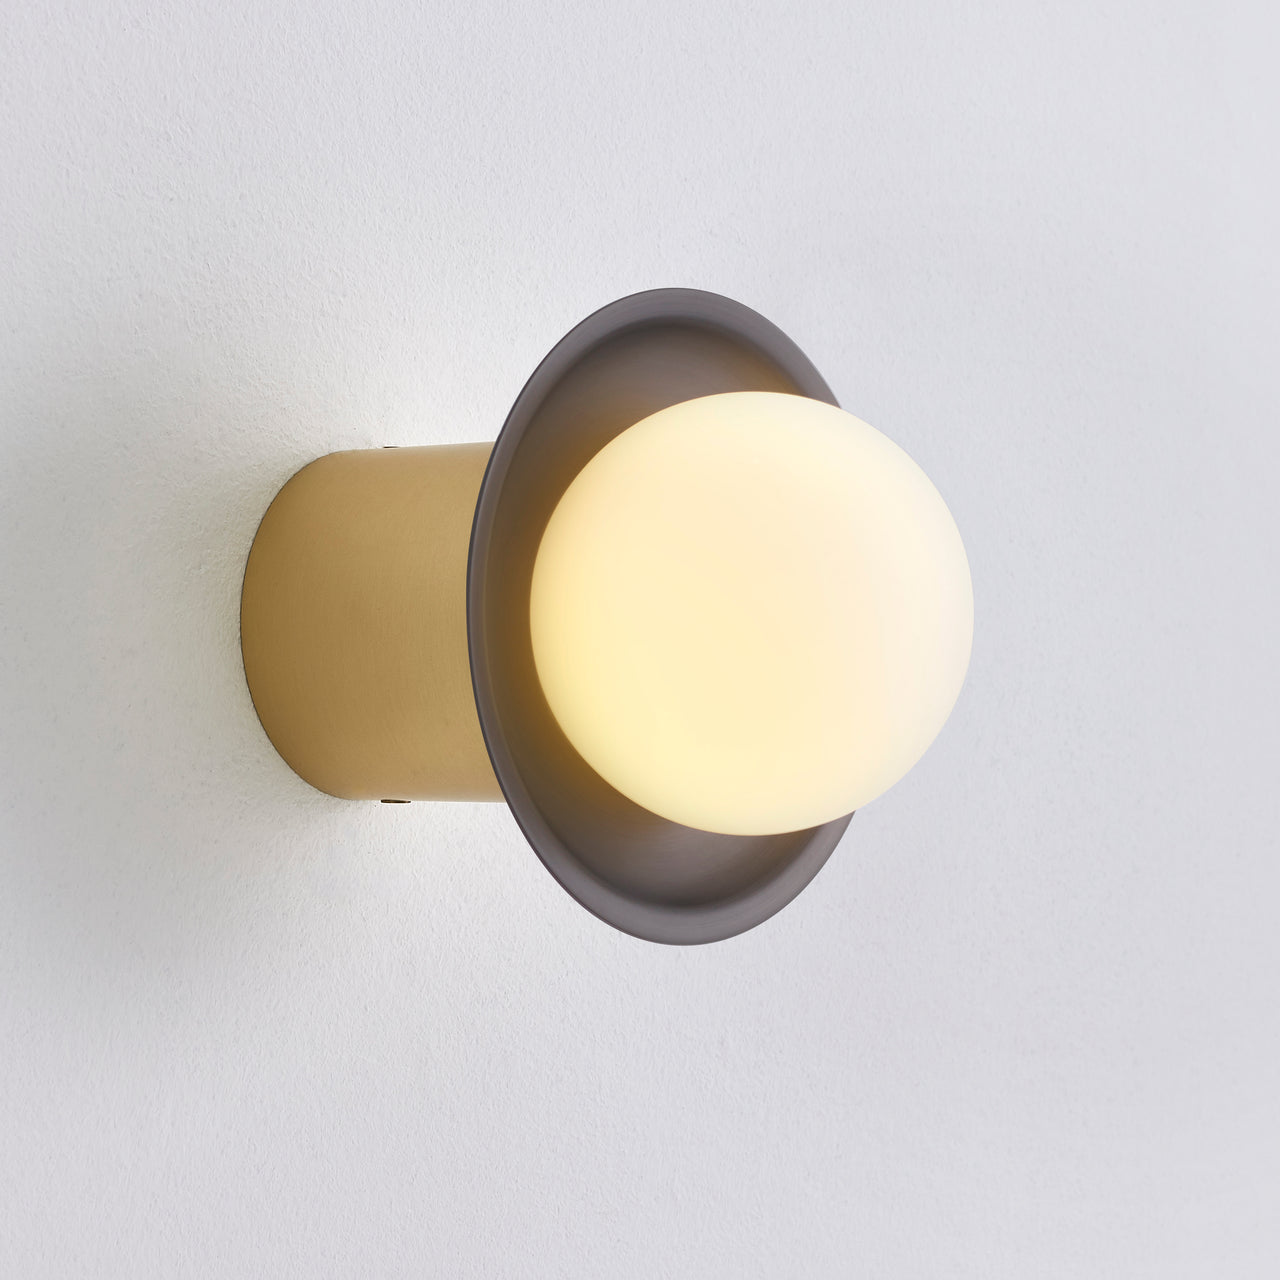 Janed Wall Light: Large